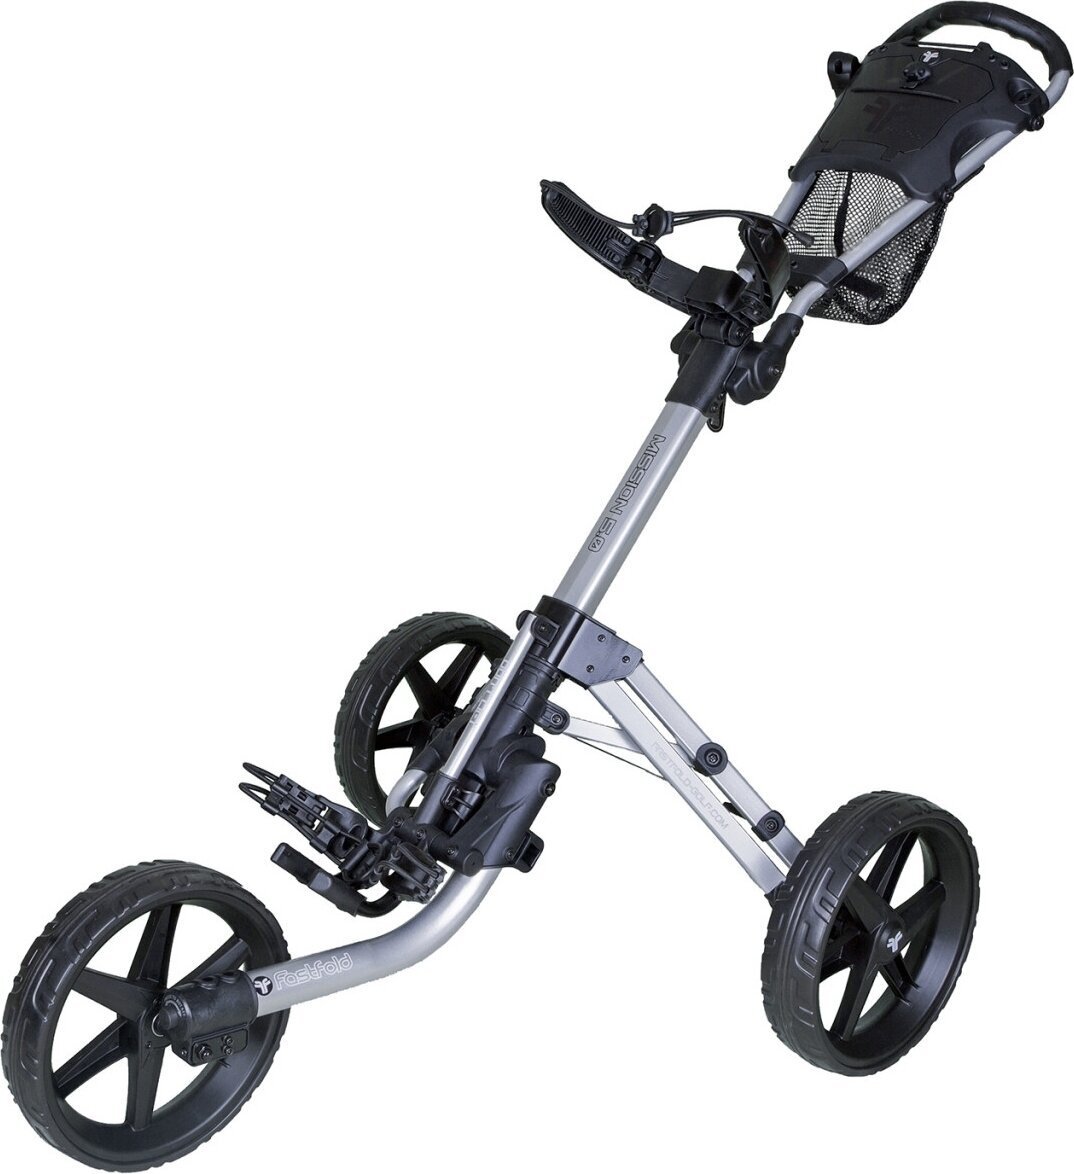 Pushtrolley Fastfold Mission 5.0 Silver/Black Pushtrolley